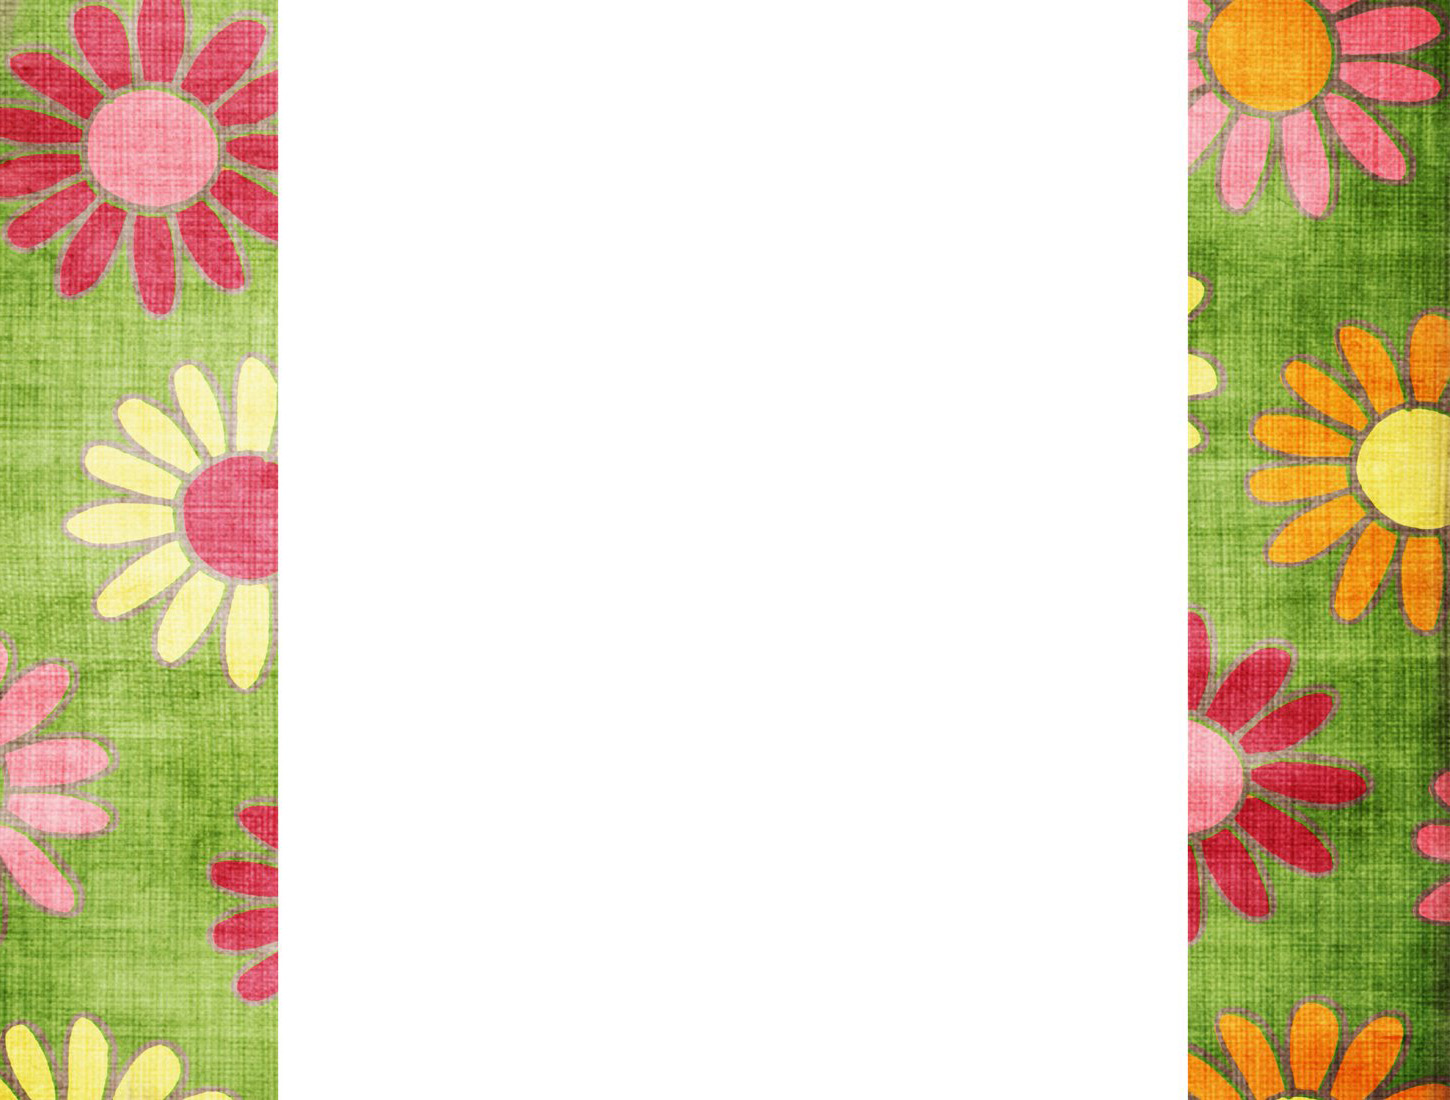 cute pink flower clipart no background